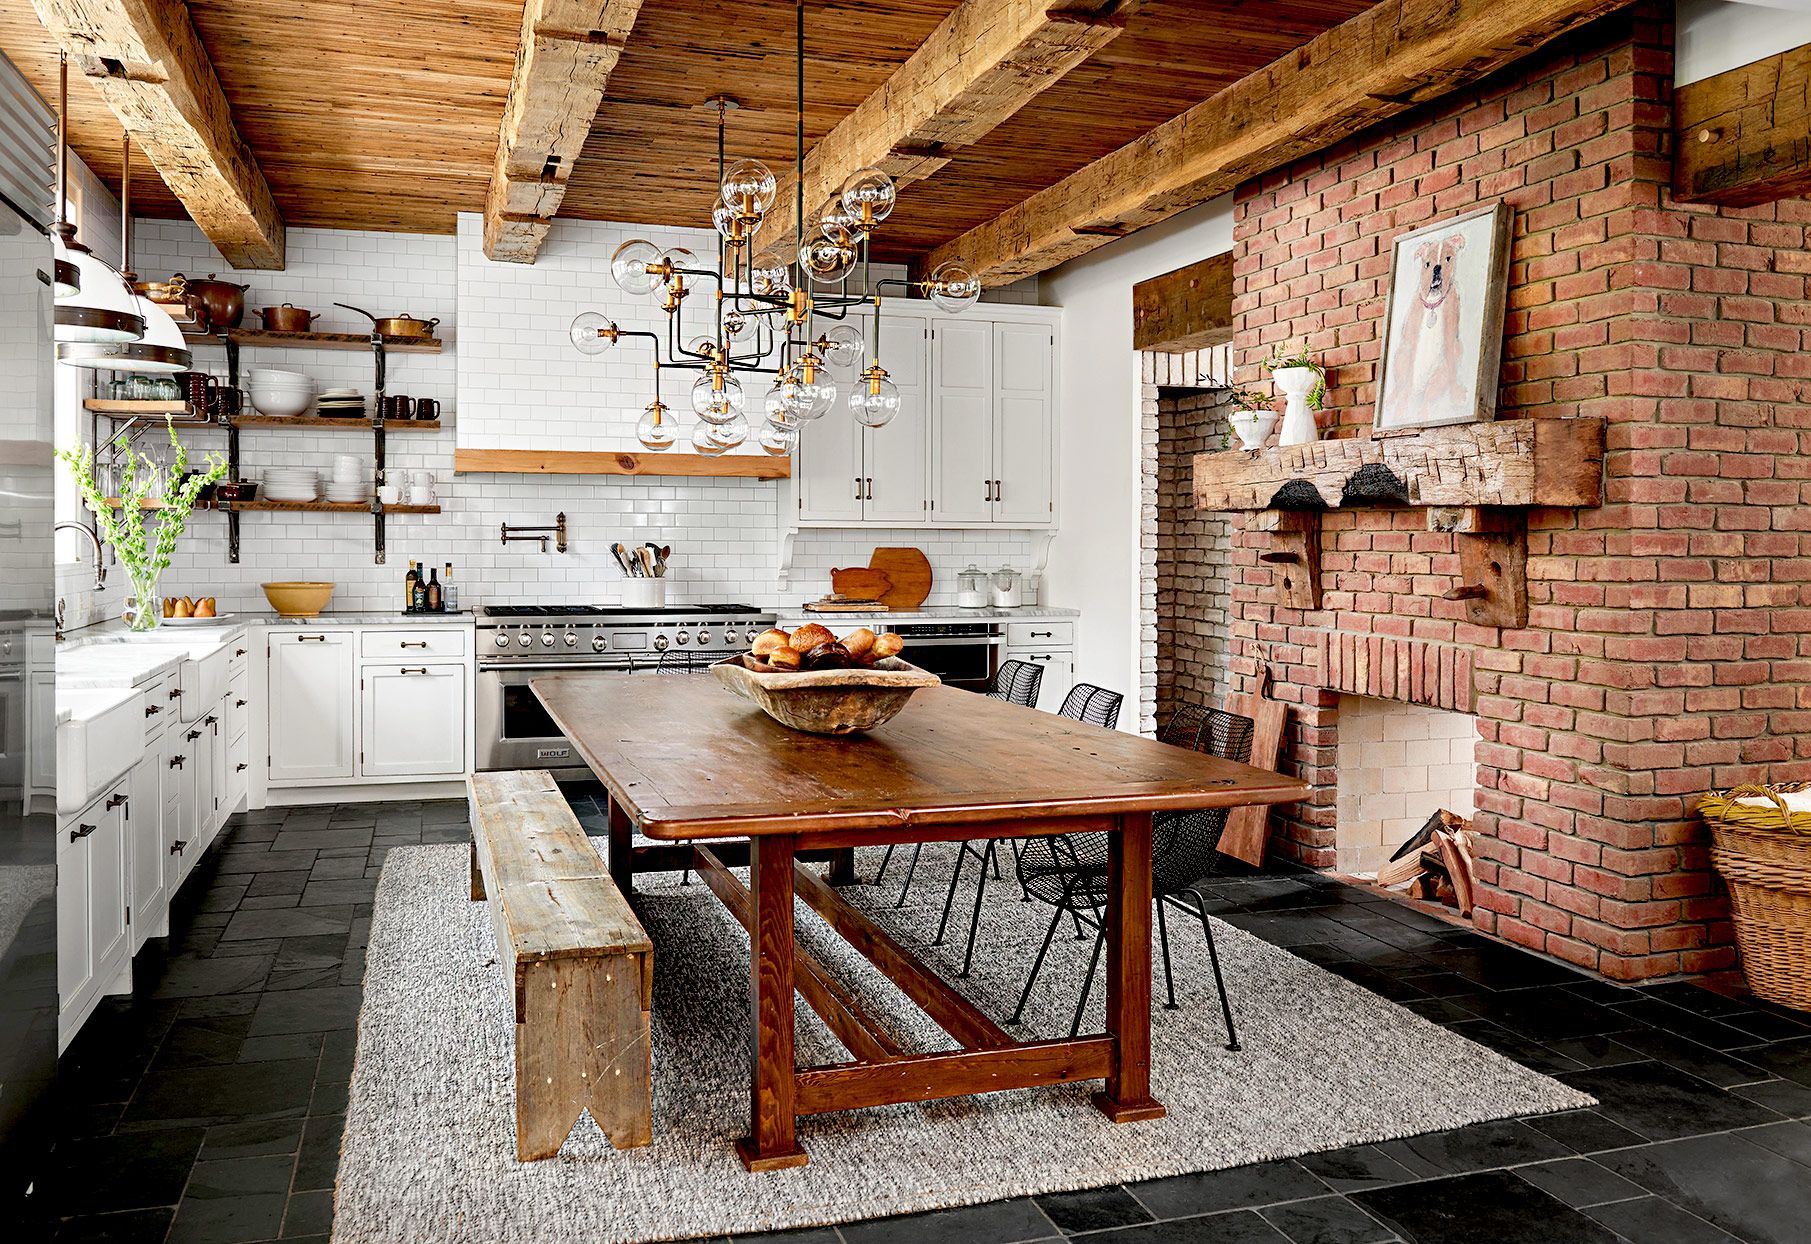 rugs in kitchens - your opinion please - MY FRENCH COUNTRY HOME